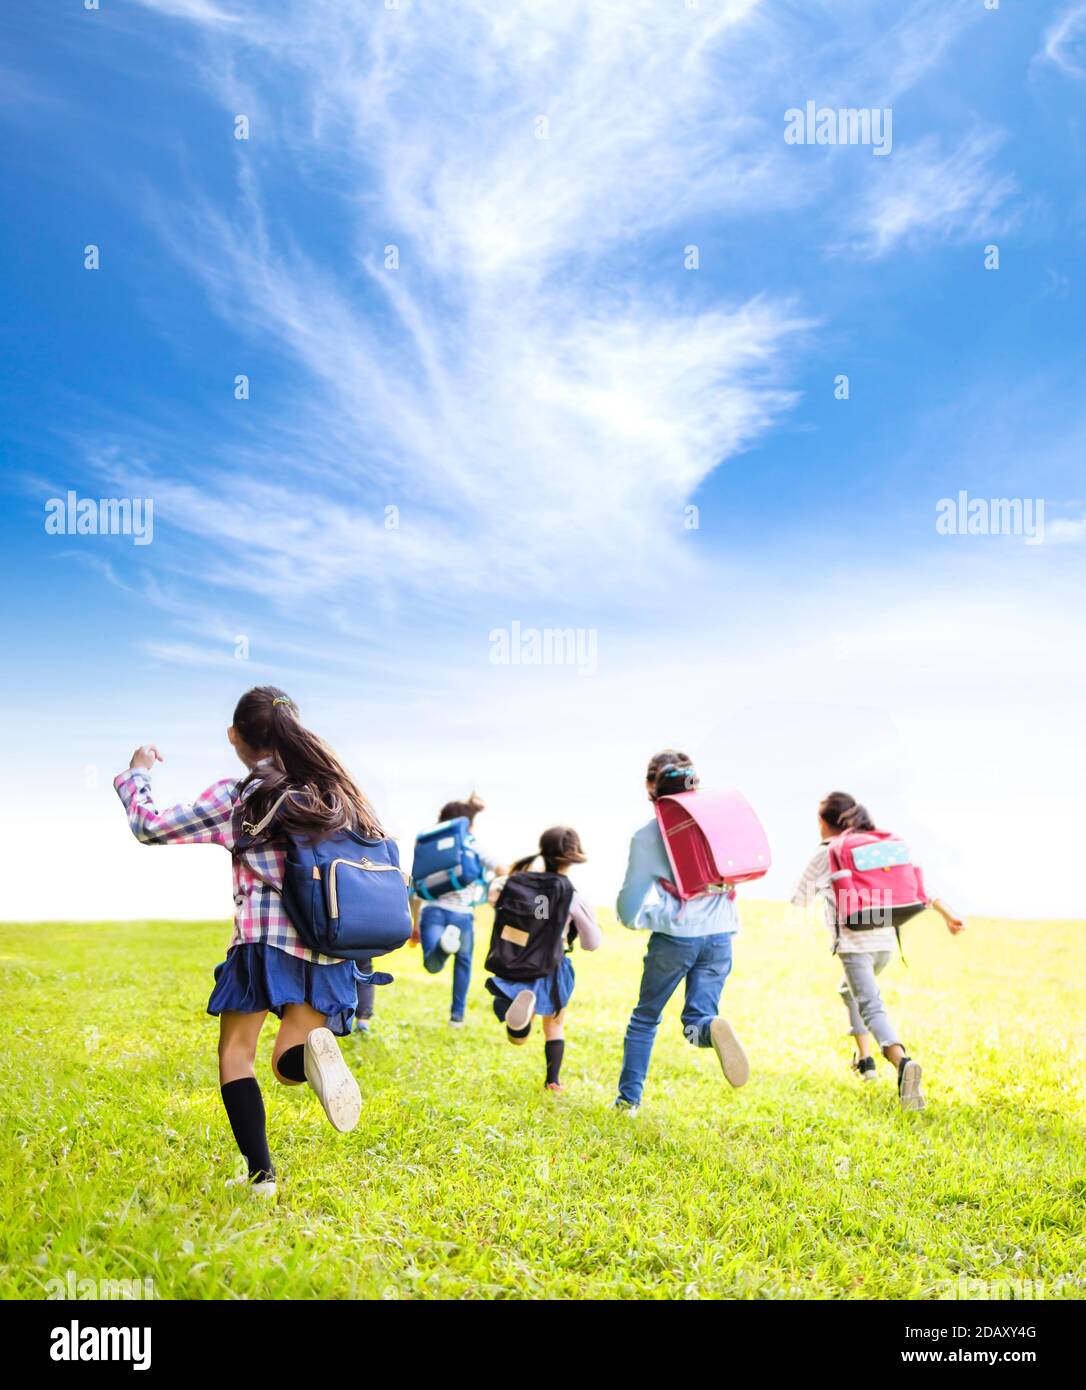 rear view of elementary school kids running on the grass Stock Photo